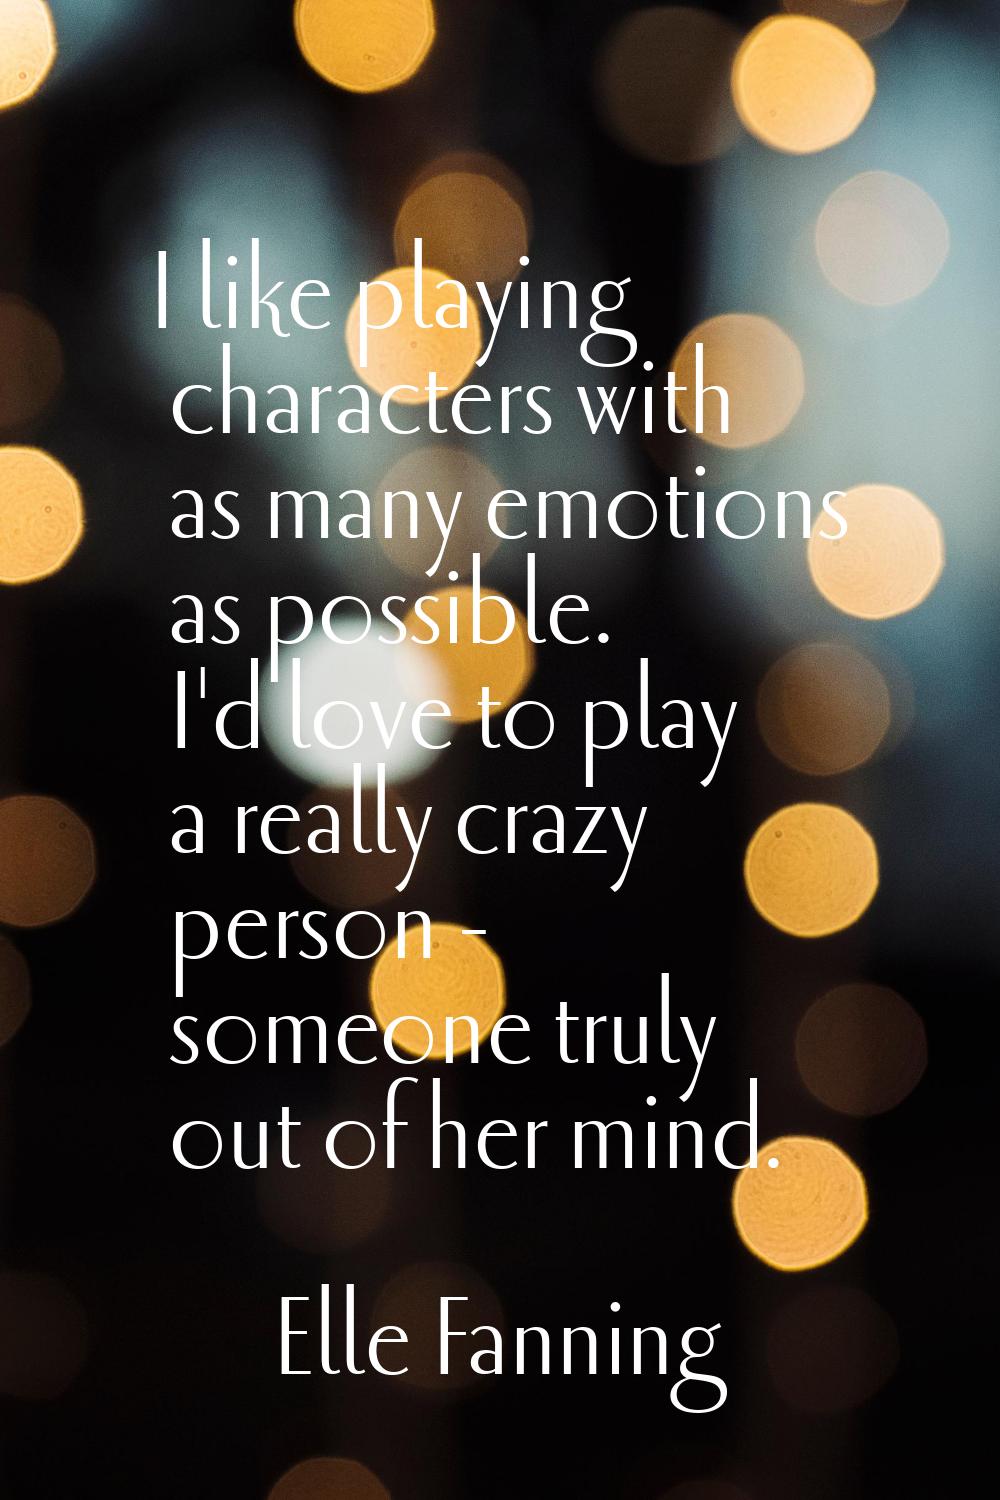 I like playing characters with as many emotions as possible. I'd love to play a really crazy person